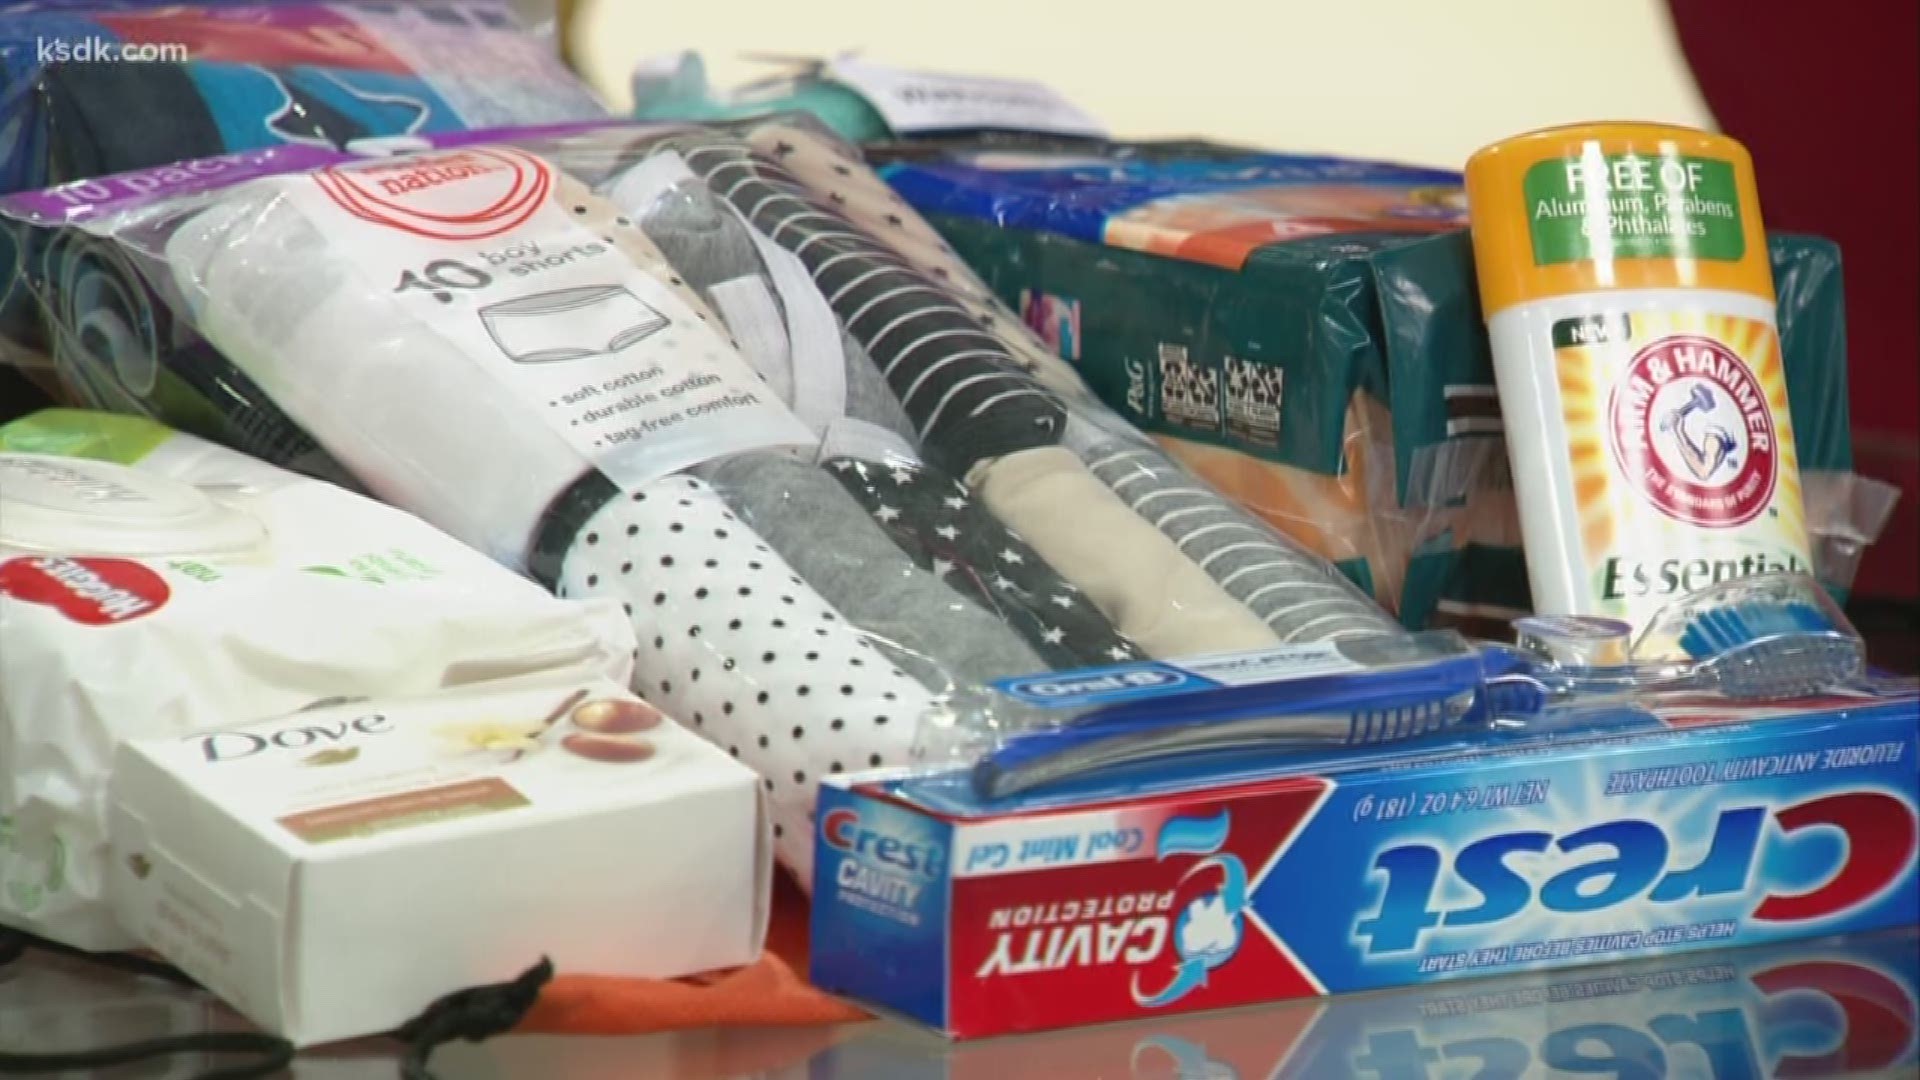 Mama2Mama is taking donations to provide area public school kids with hygiene products.